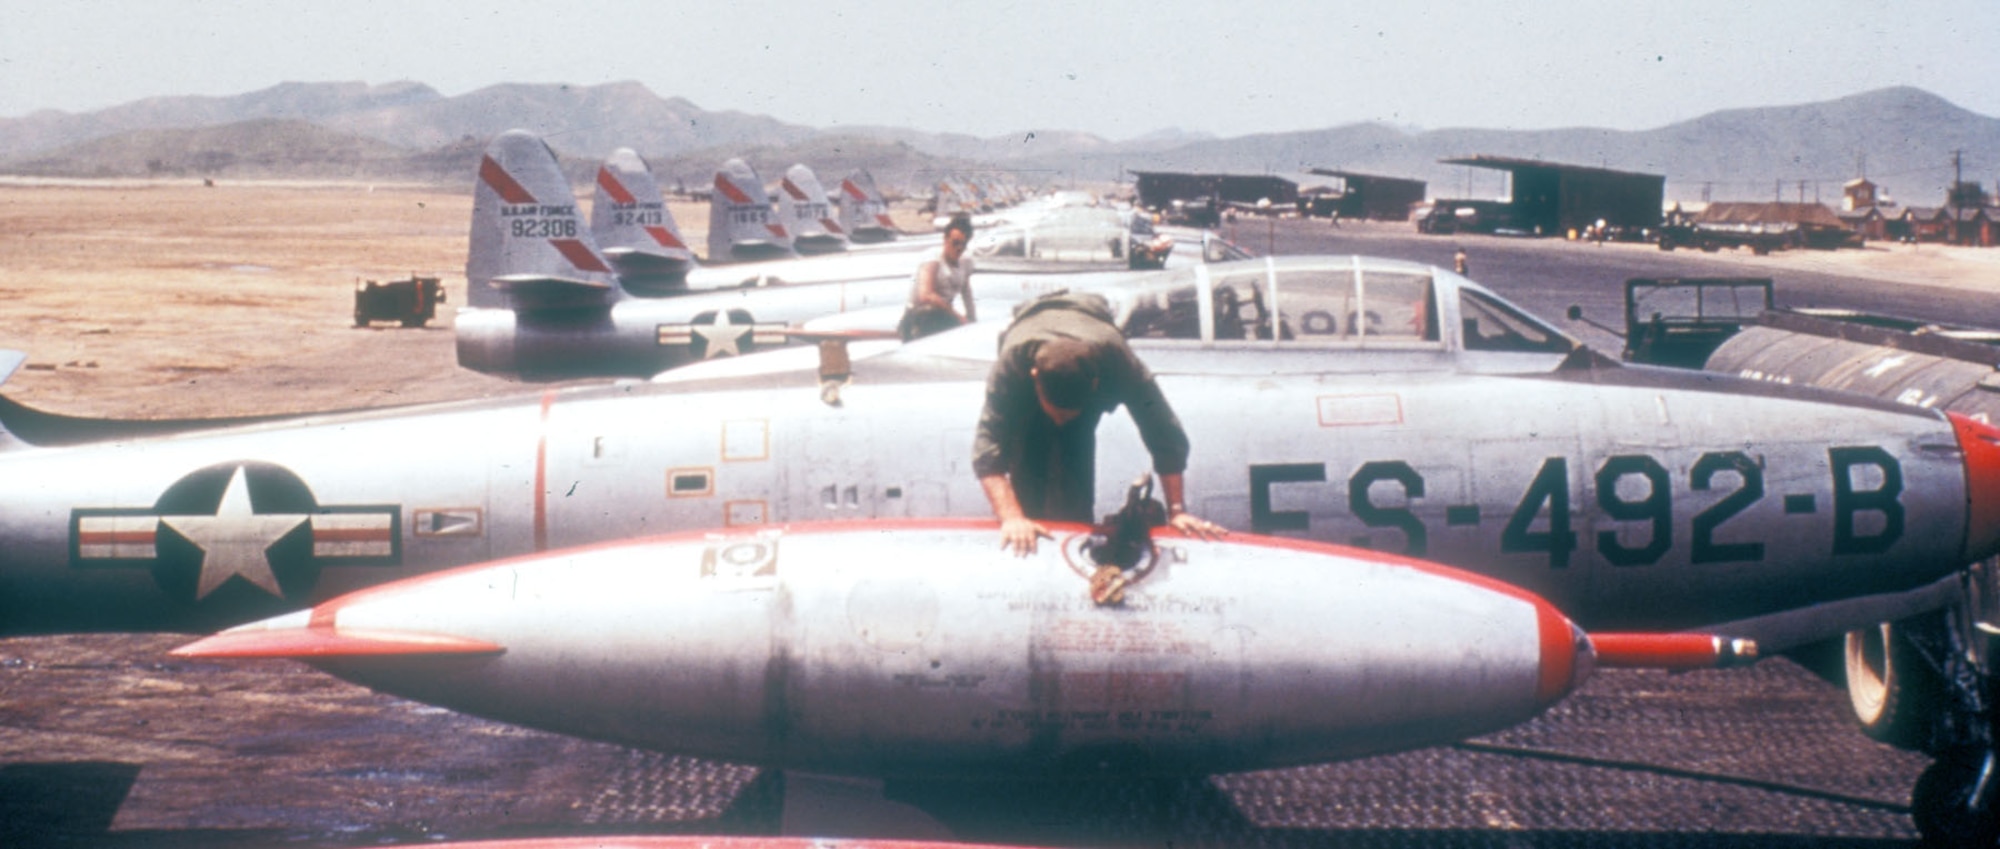 The refueling probe of the type used during OPERATION HIGH TIDE is visible on the front of the wing tip fuel tank of this F-84E. (U.S. Air Force photo)